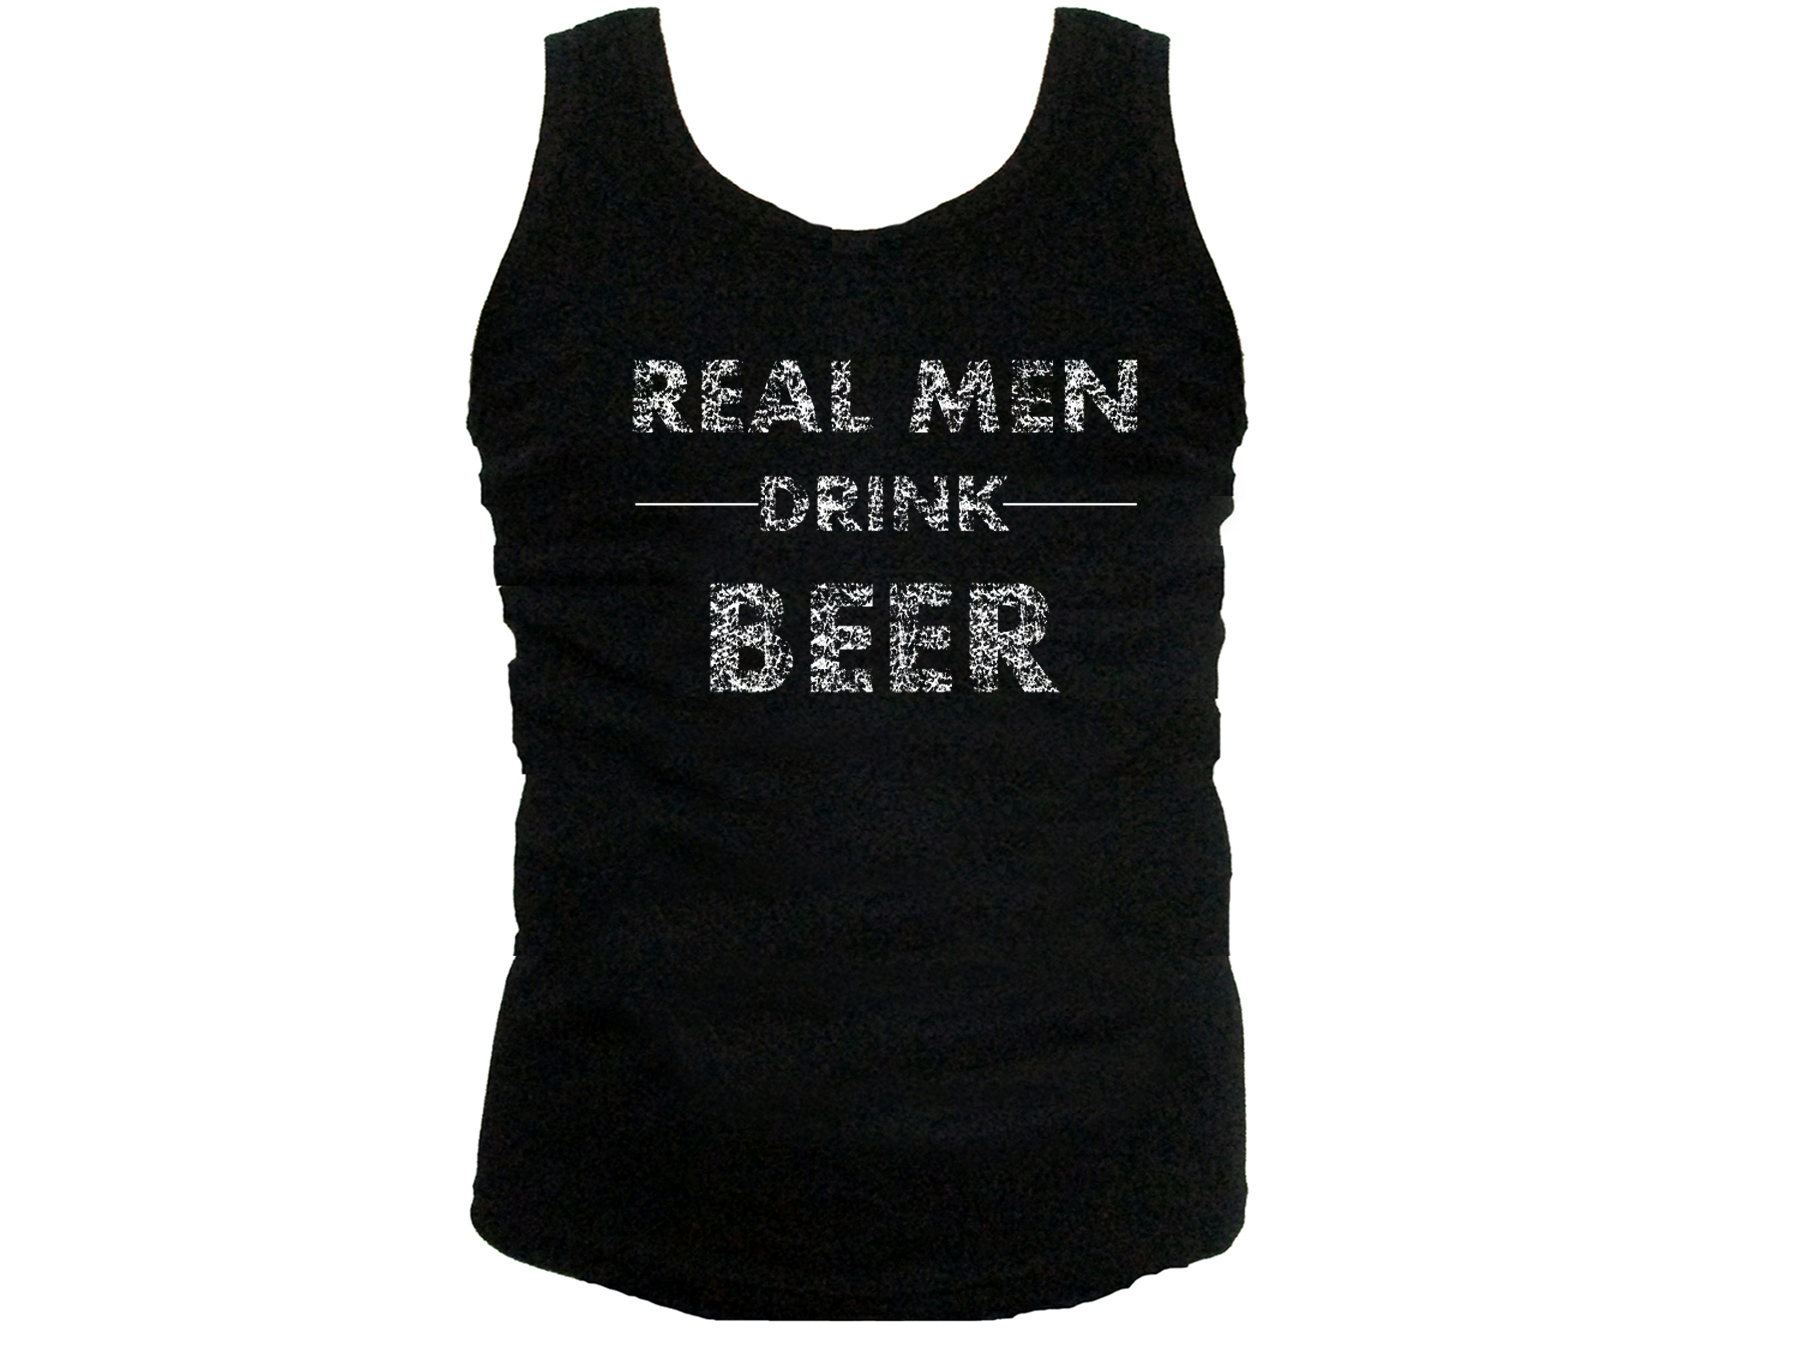 Real men drink beer funny drinking cheap distressed look tank top